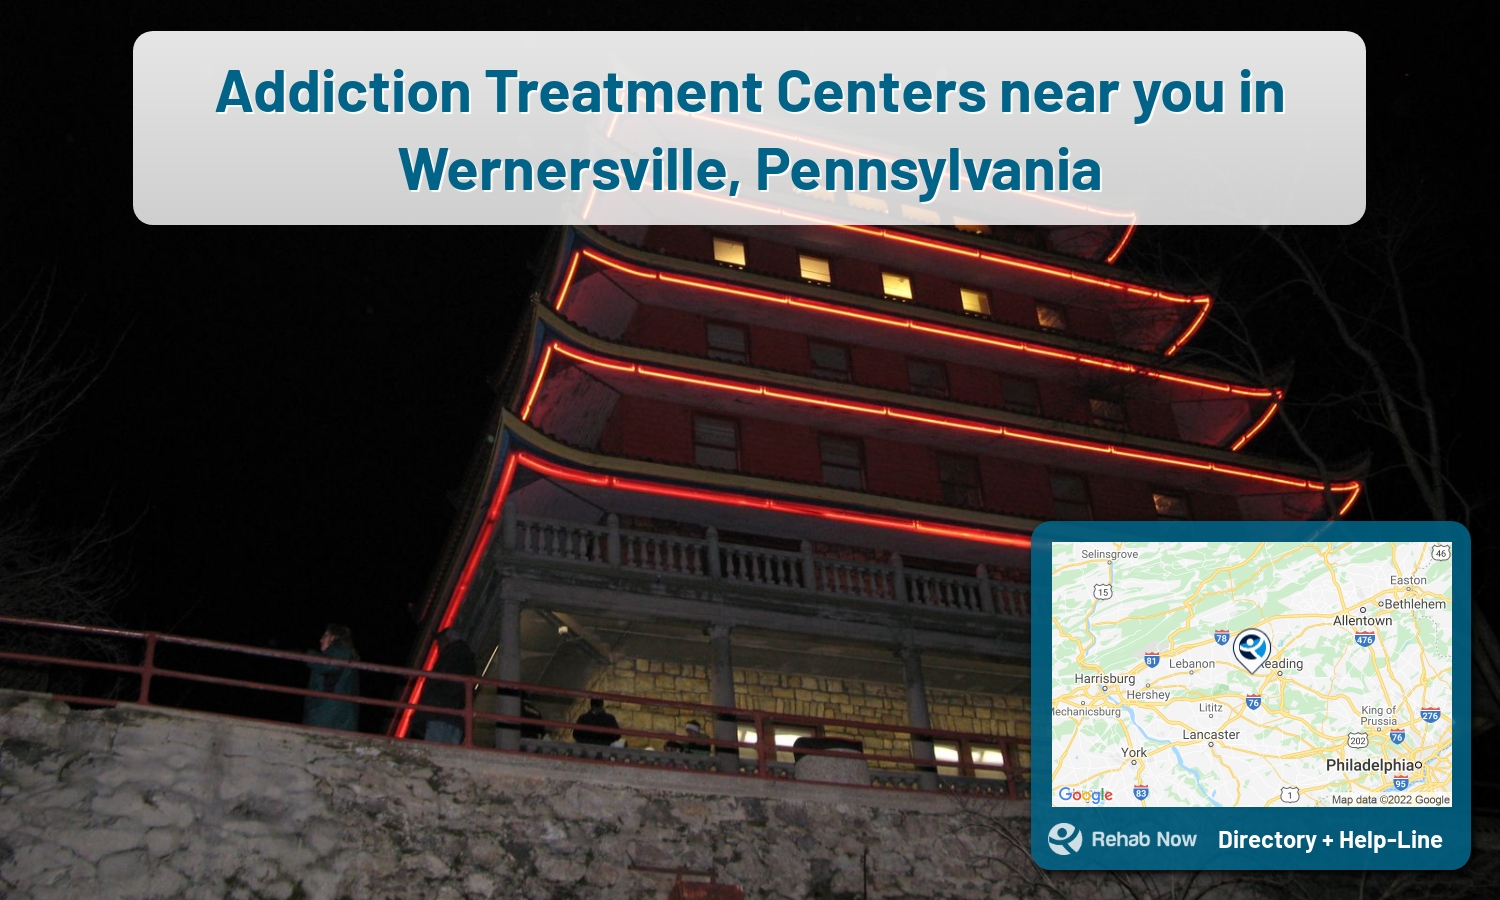 View options, availability, treatment methods, and more, for drug rehab and alcohol treatment in Wernersville, Pennsylvania